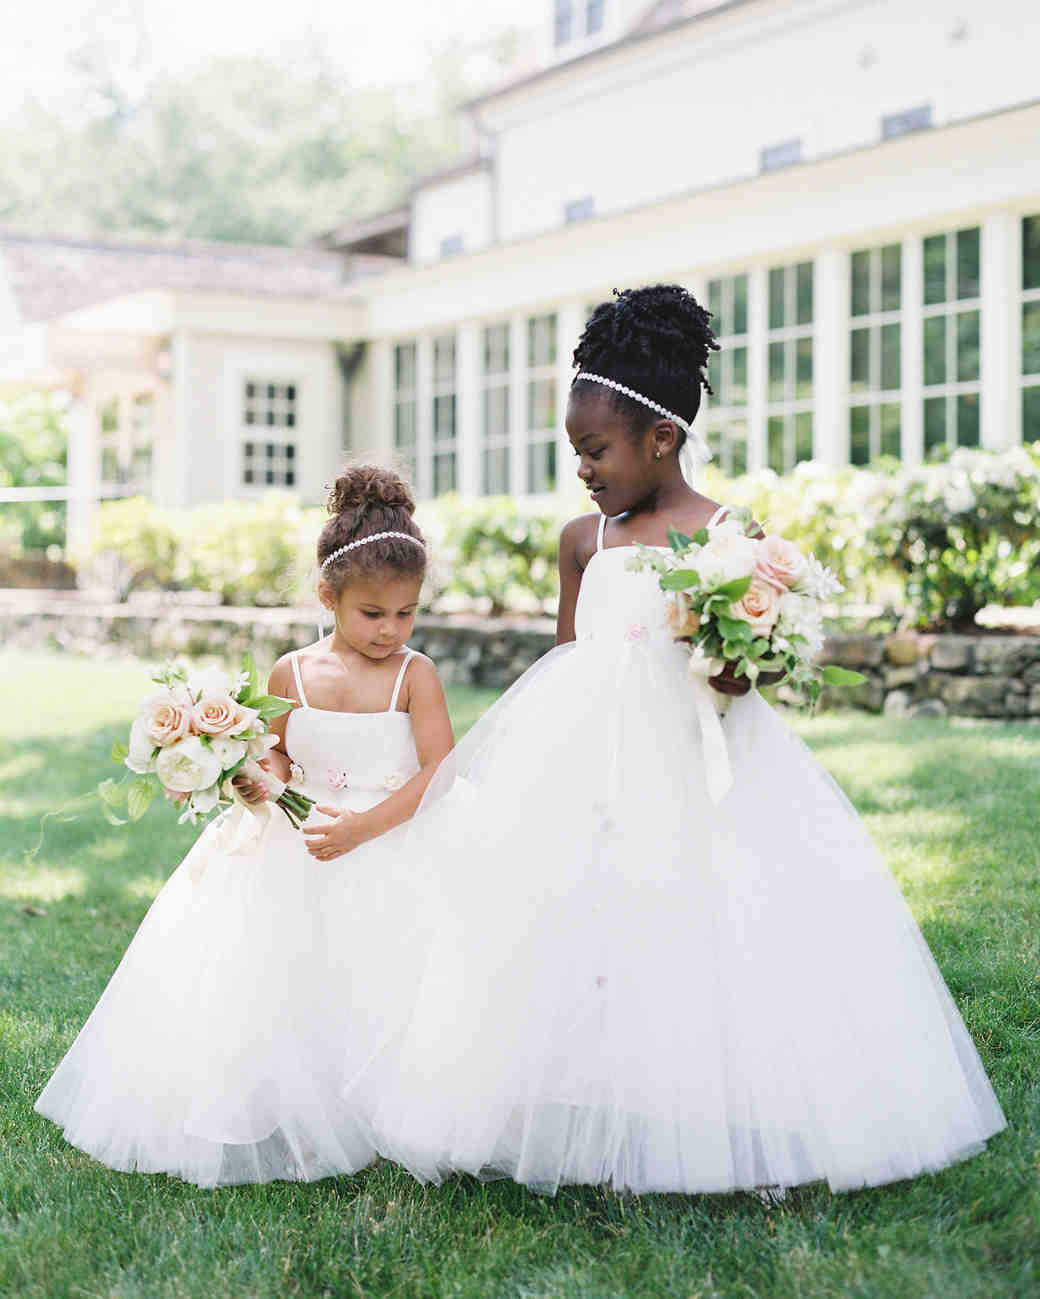 Wedding Hairstyles For Flower Girls
 Adorable Hairstyle Ideas for Your Flower Girls